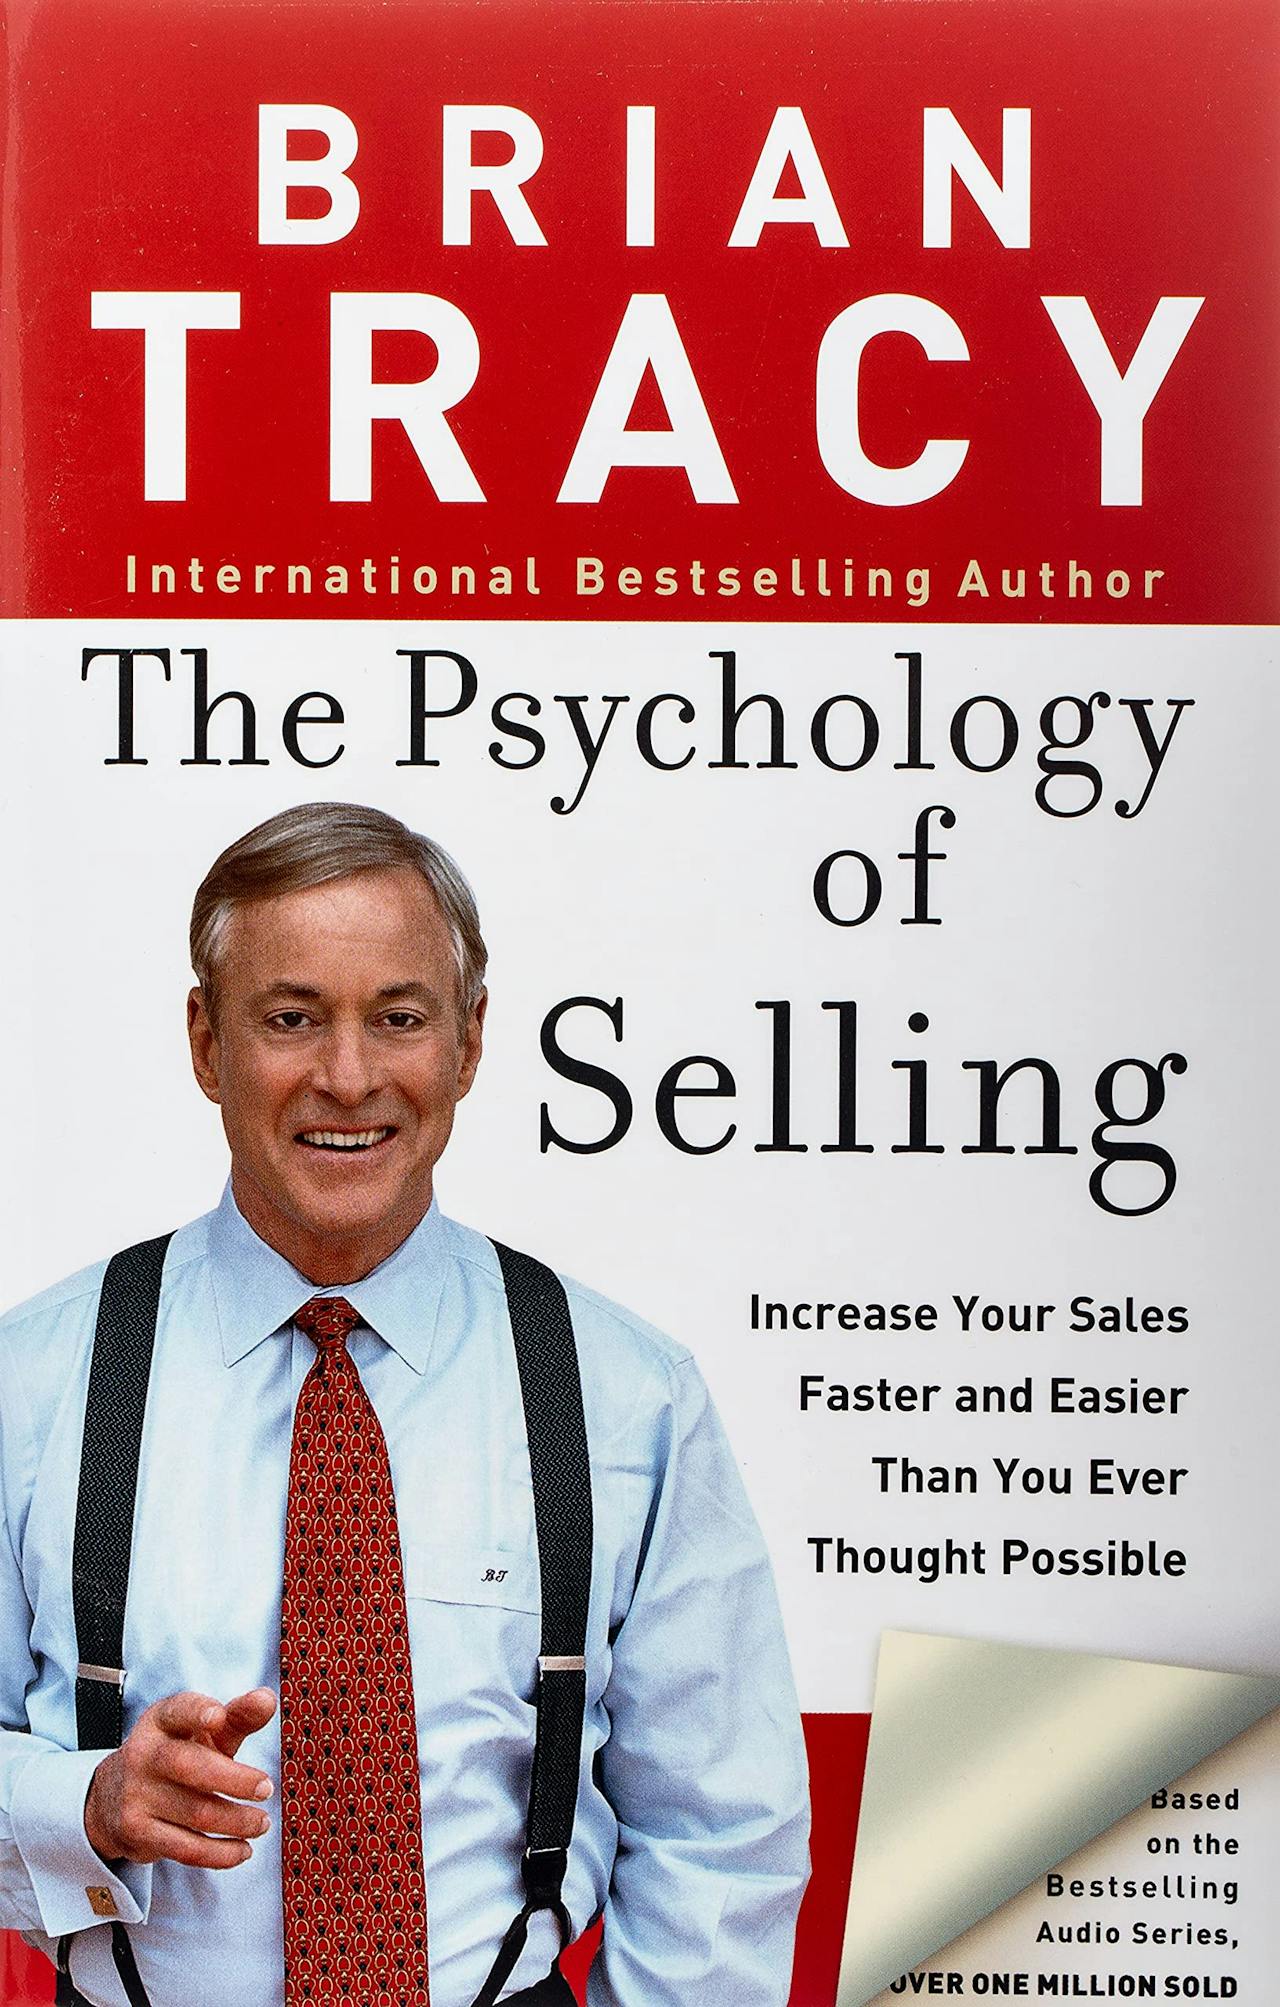 5 Sales Books EVERY Salesperson Should Read in 2022